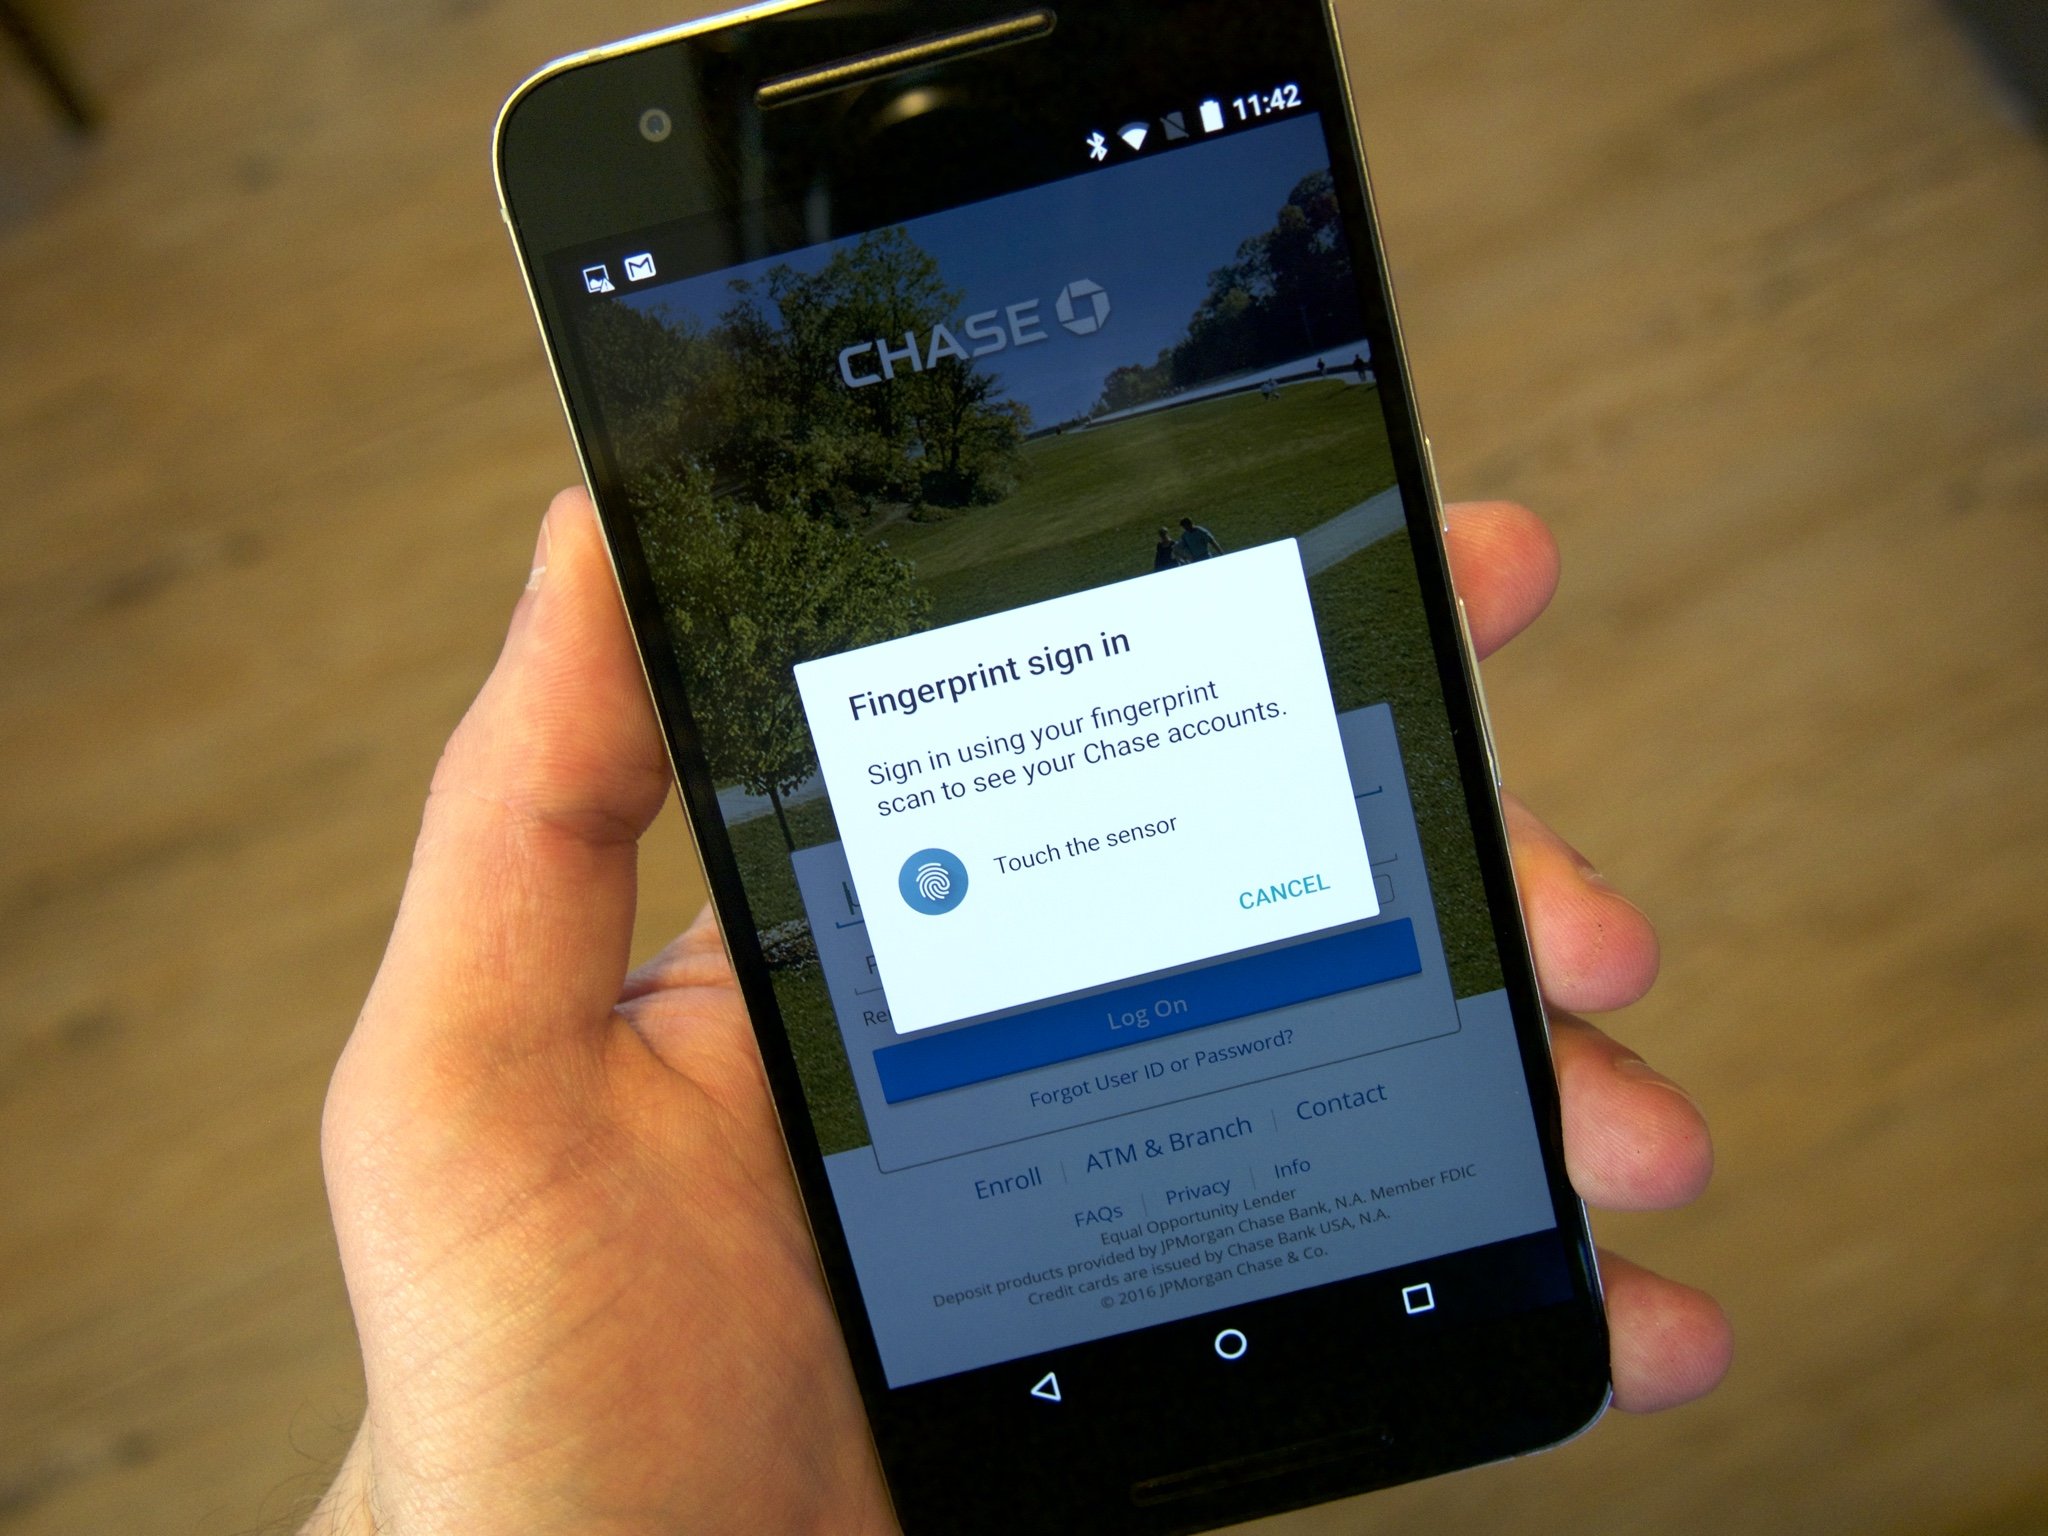 Chase Mobile app now lets you log in with your fingerprint